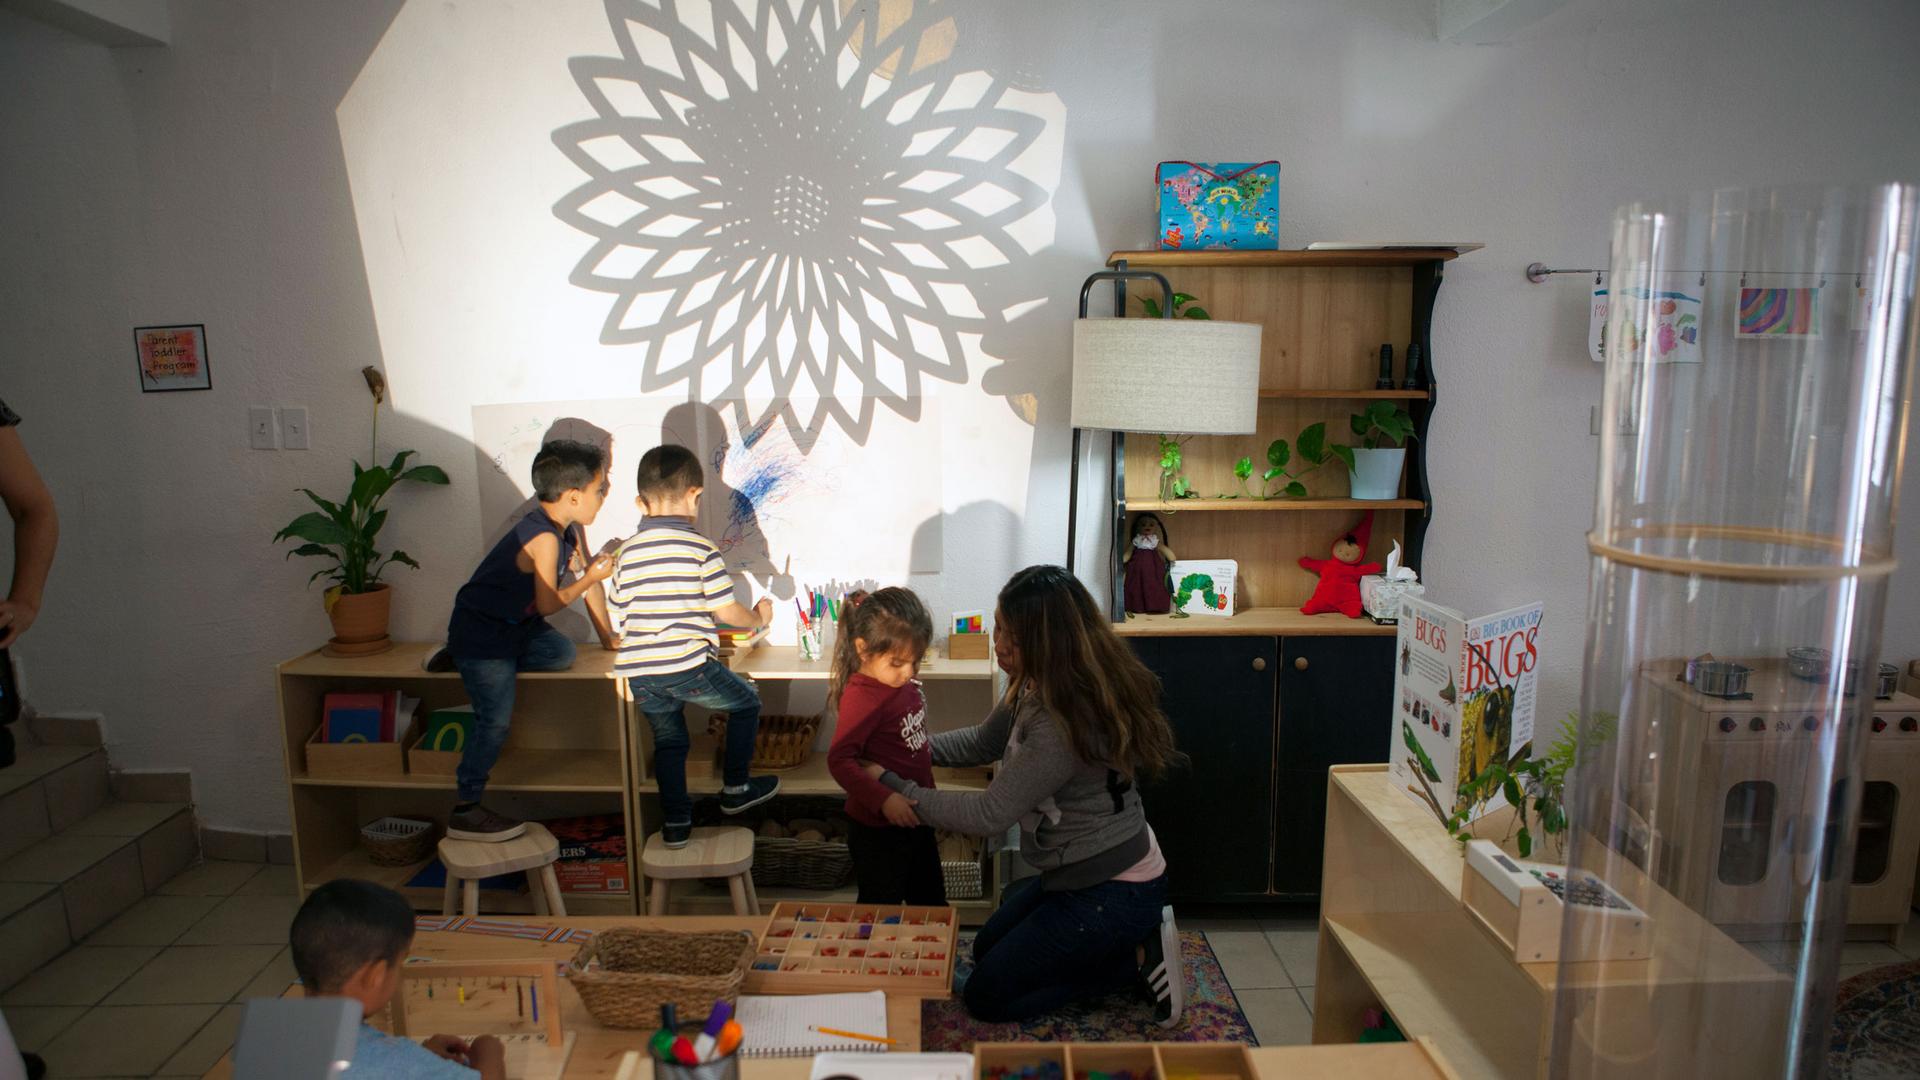 Several children are shown playing with a flower-shaped light projection on a wall.